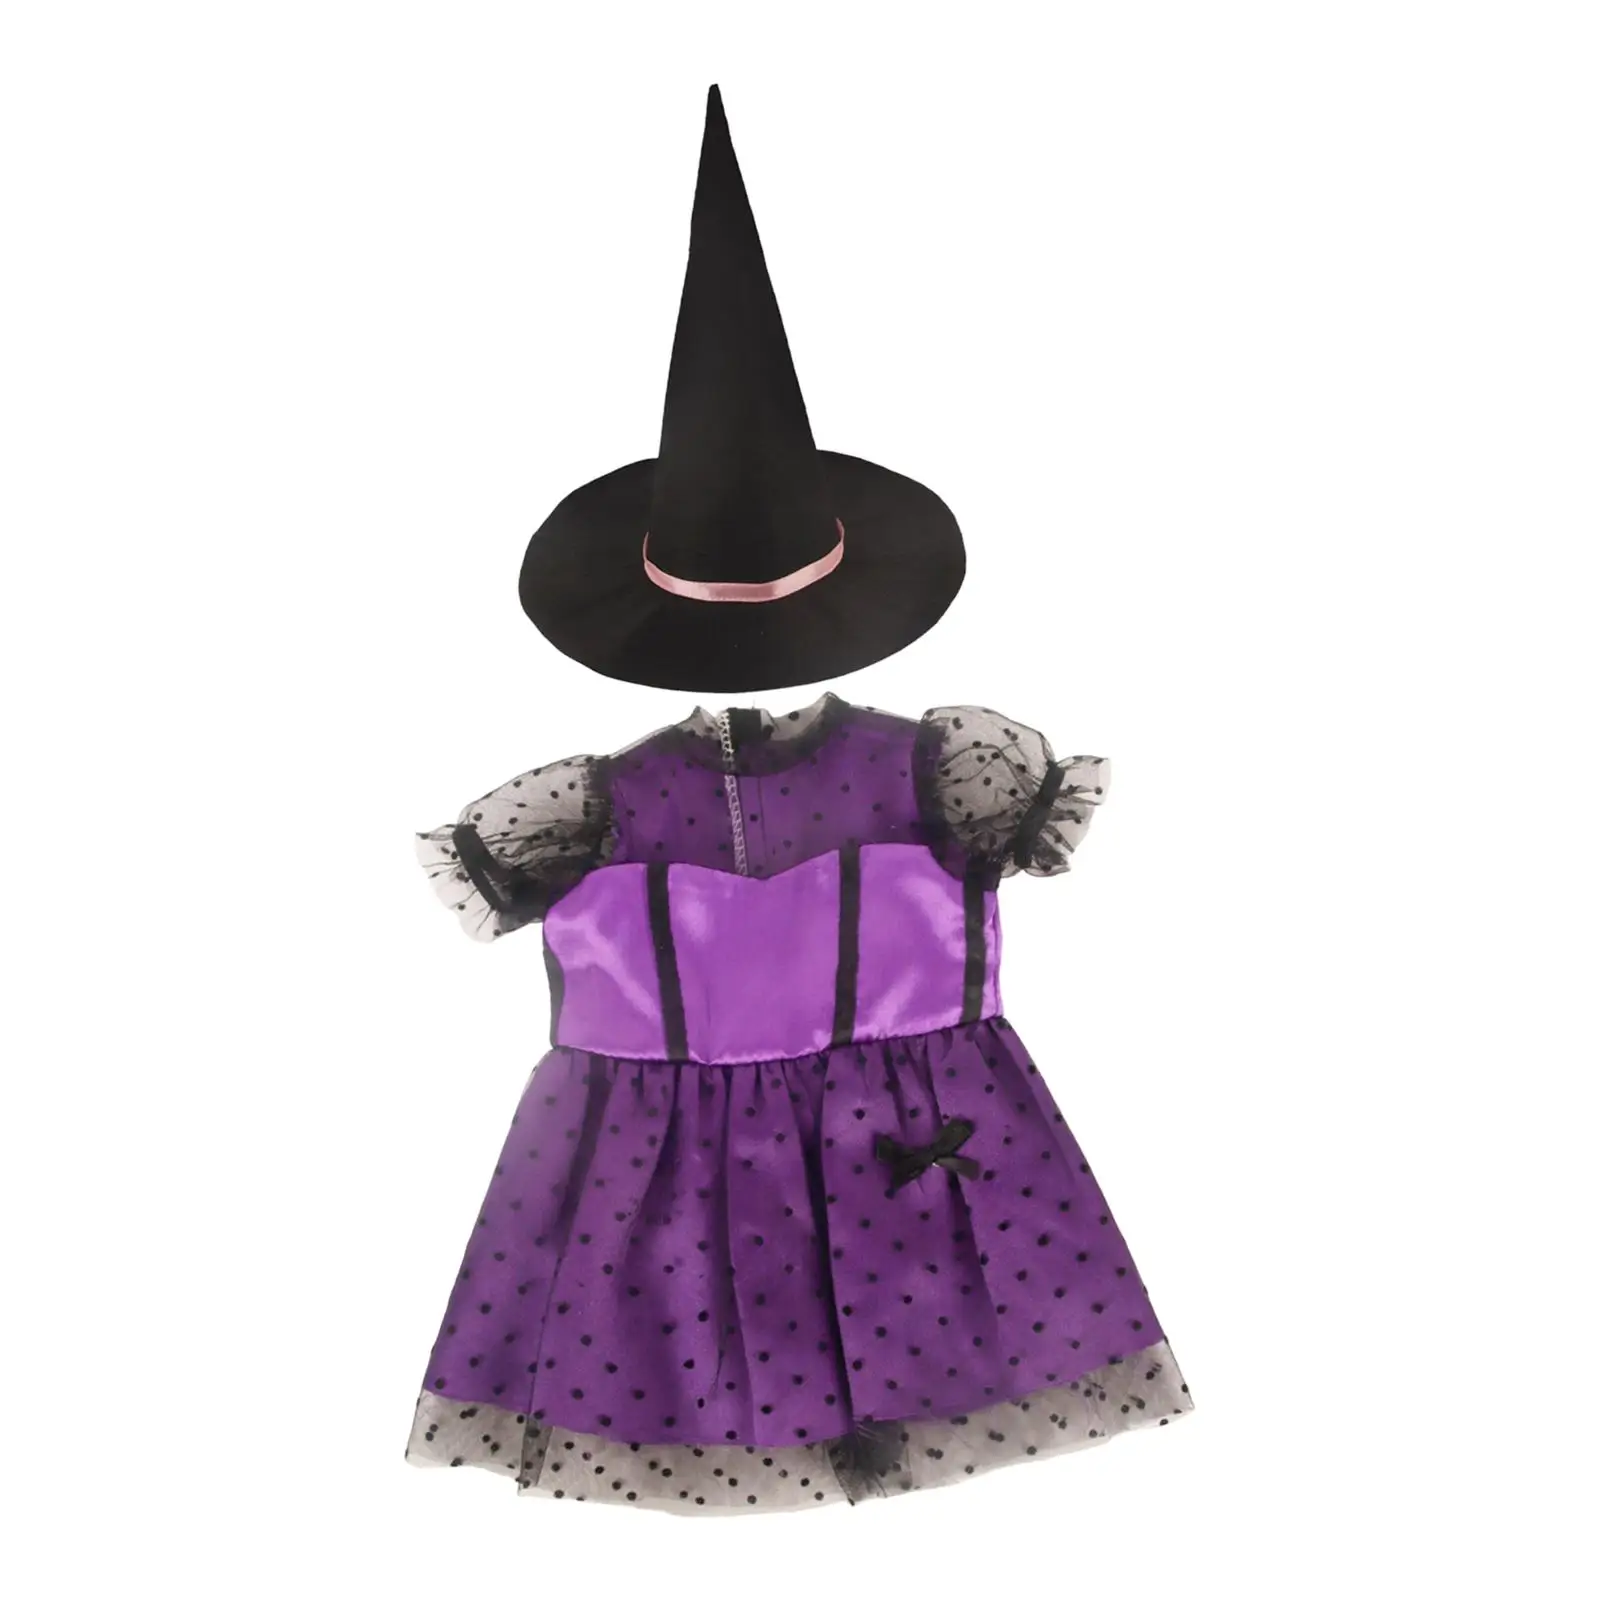 18 inch Girl Doll Dress Hat Outfit for Festival Activity Dress up Party